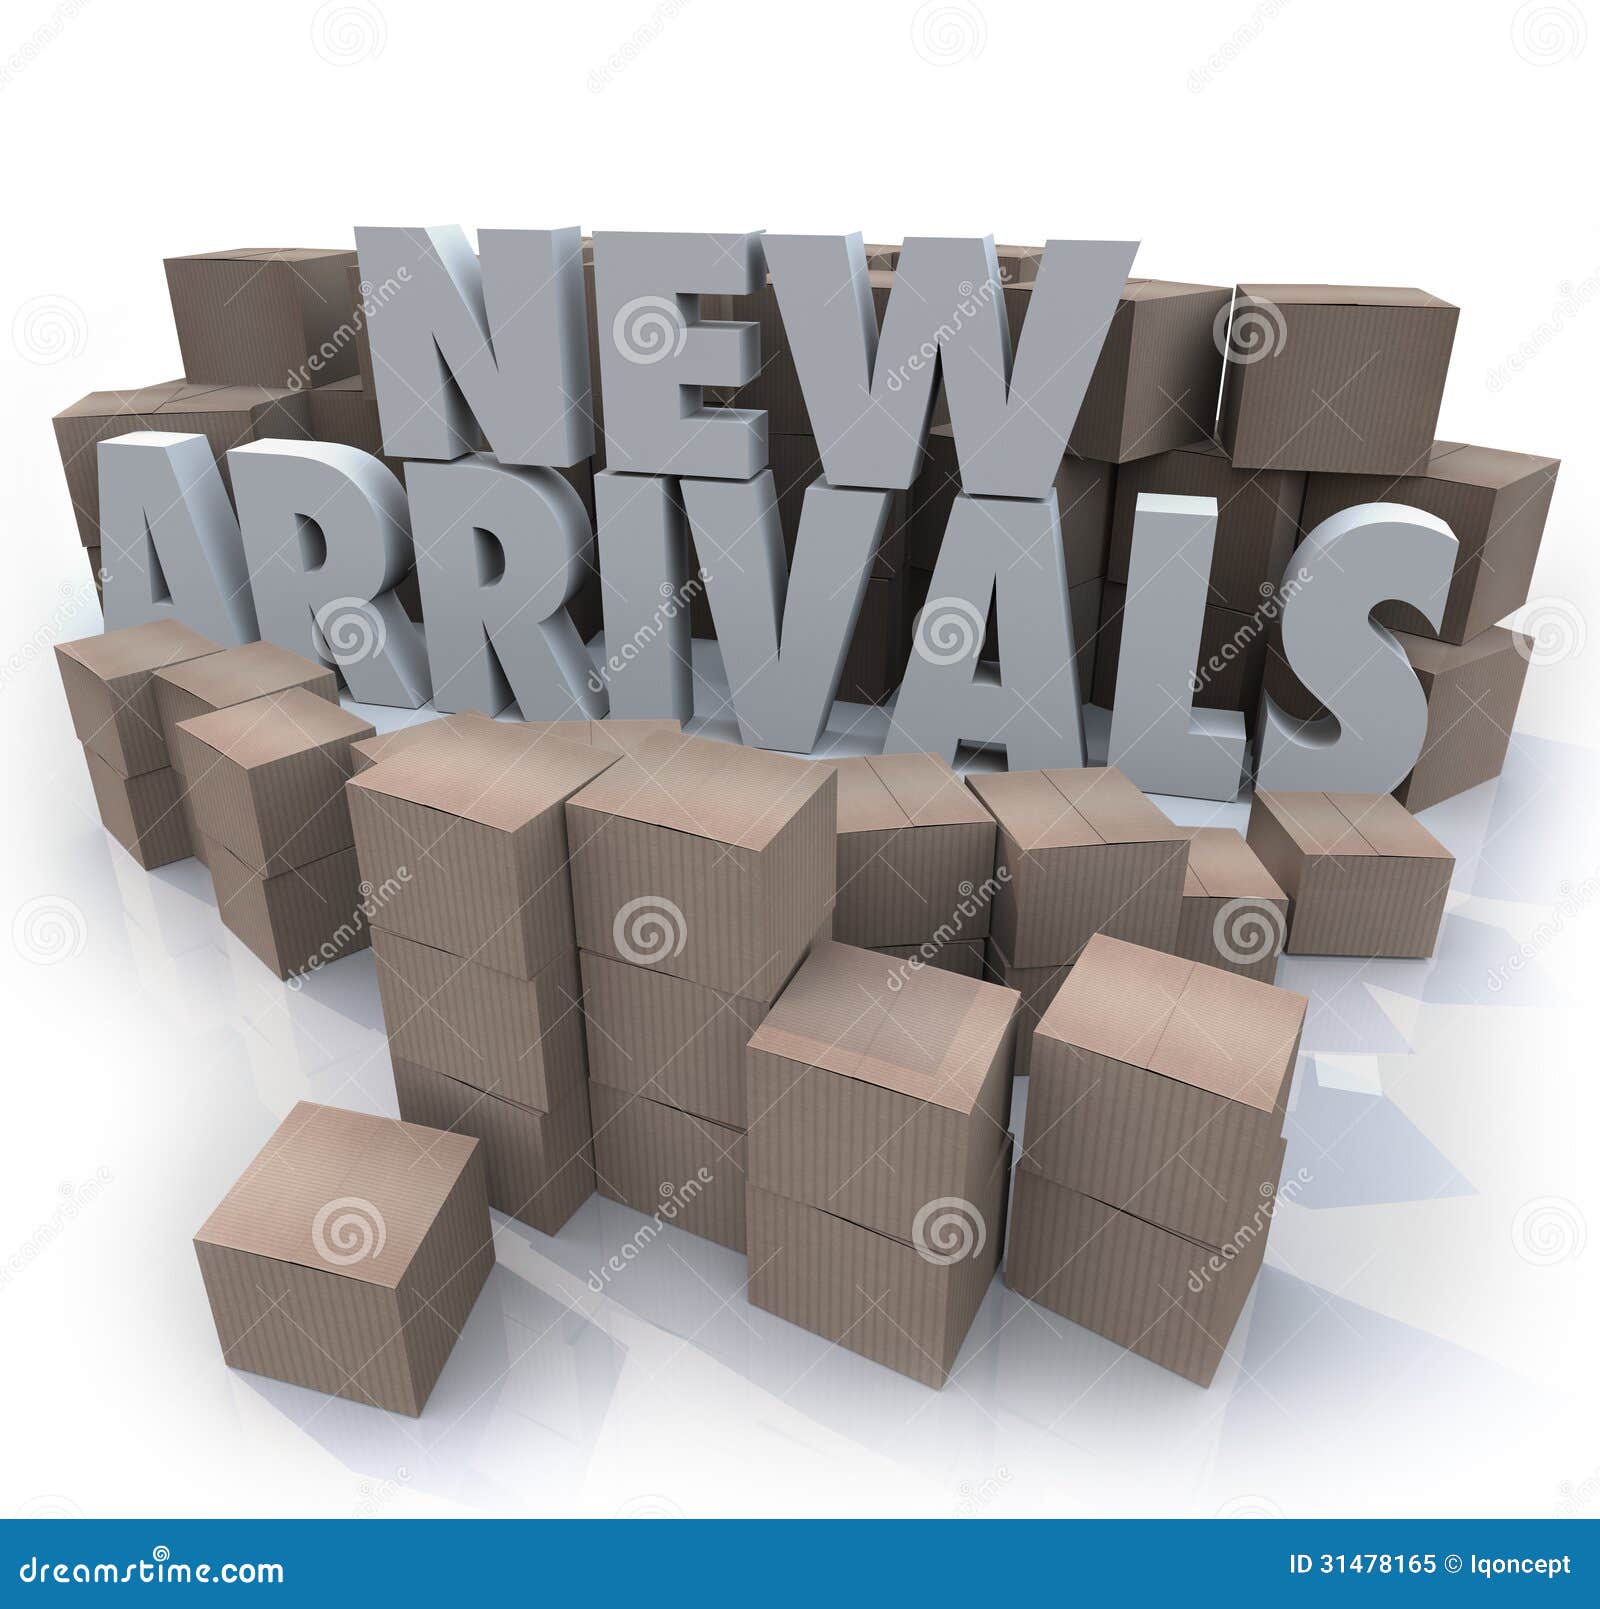 New Product Arrivals !!!